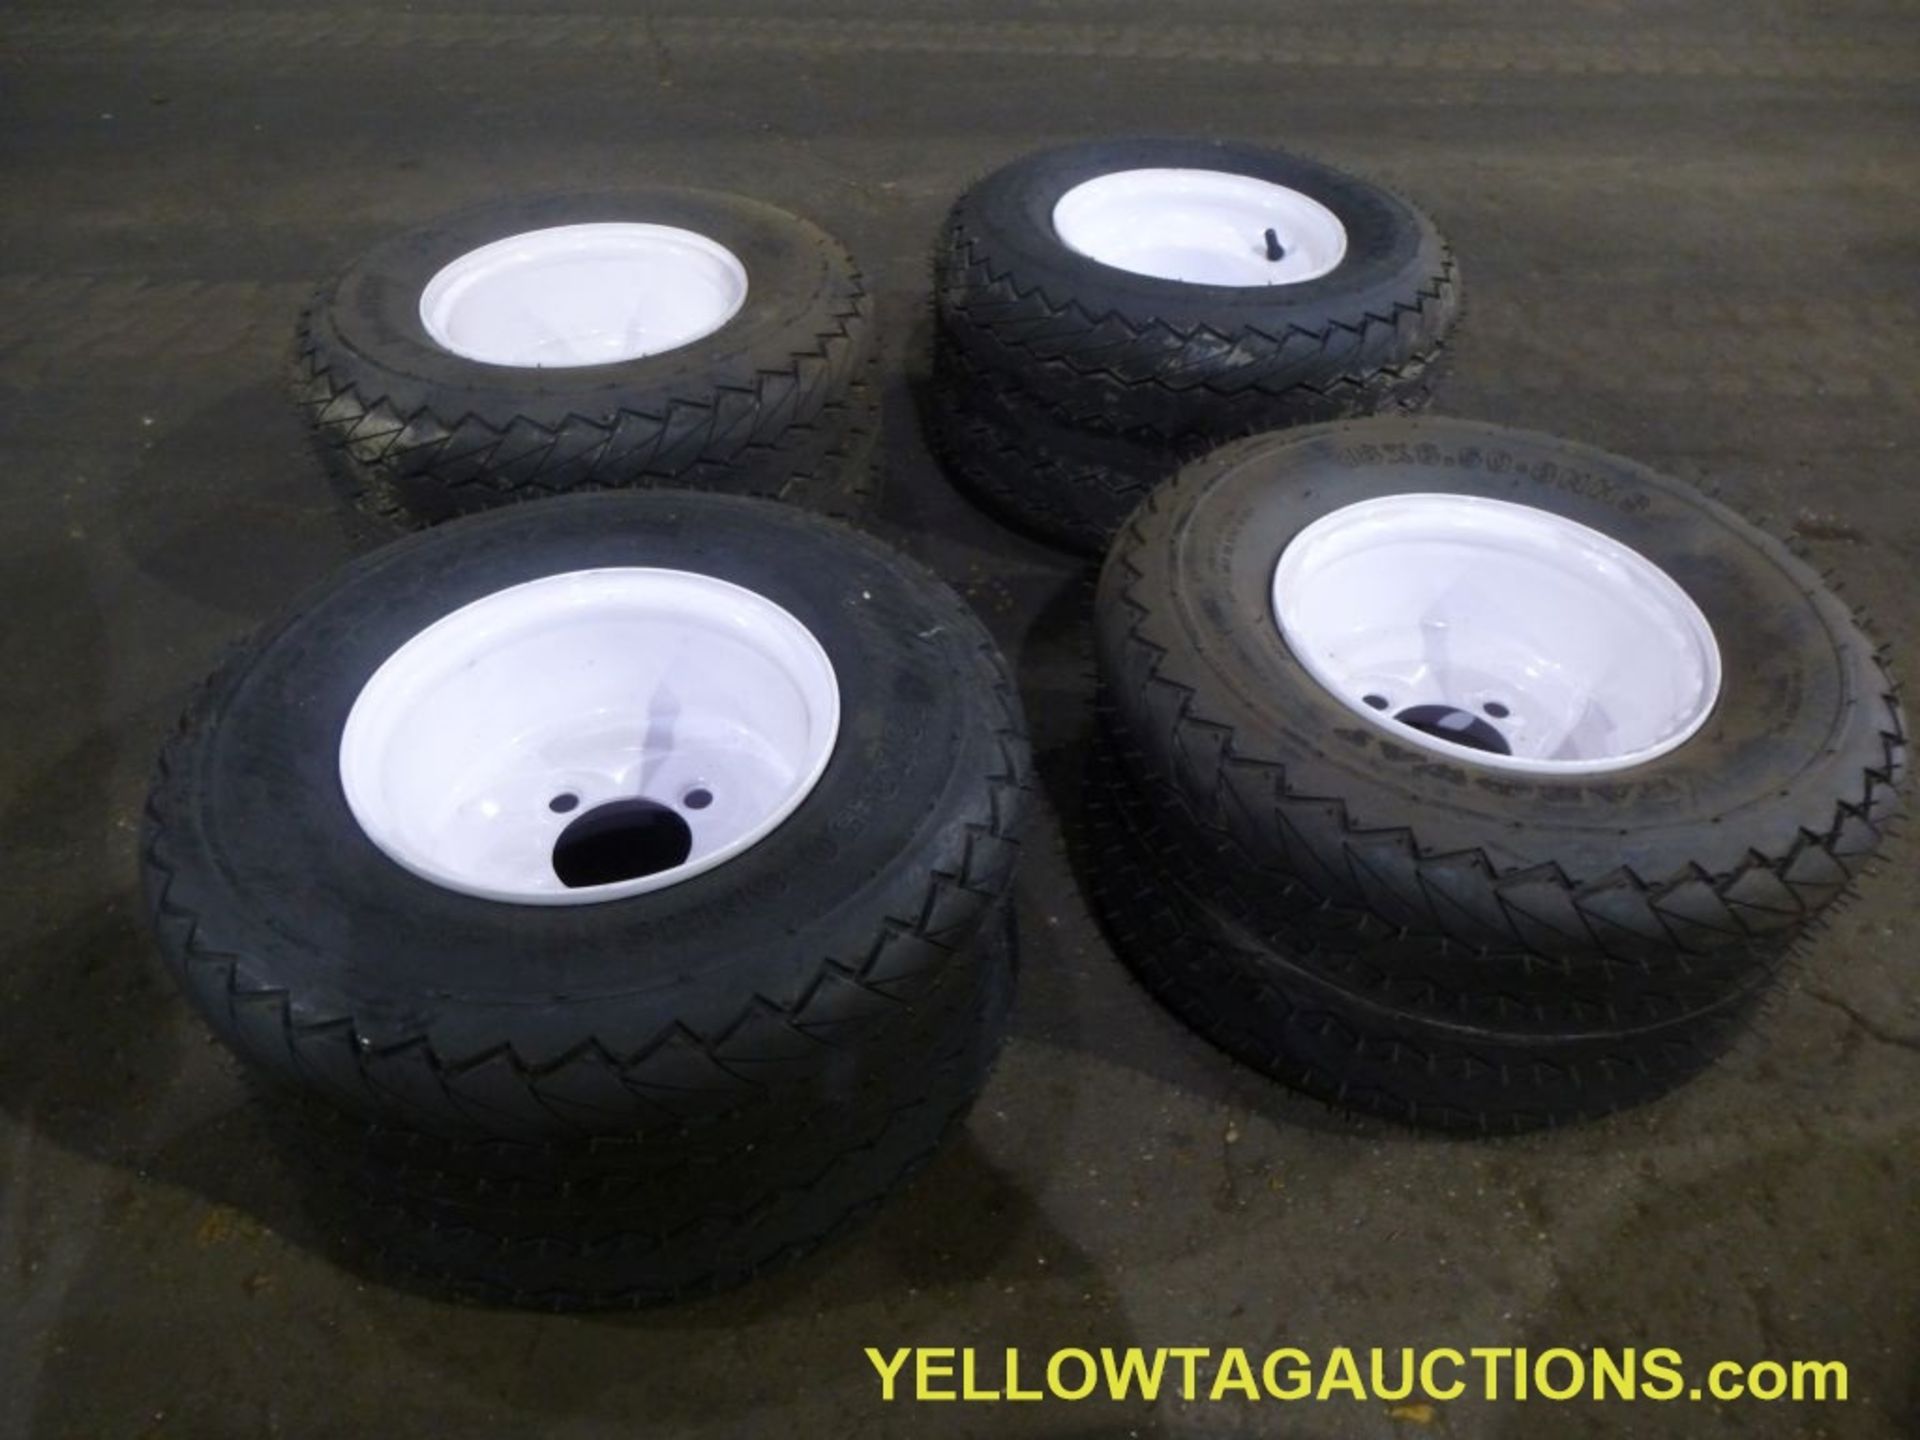 Lot of (12) FarWay 6-Ply Nylon Tires & Wheels|18 X 8.50 - 8NHS|Tag: 447 - Image 2 of 8